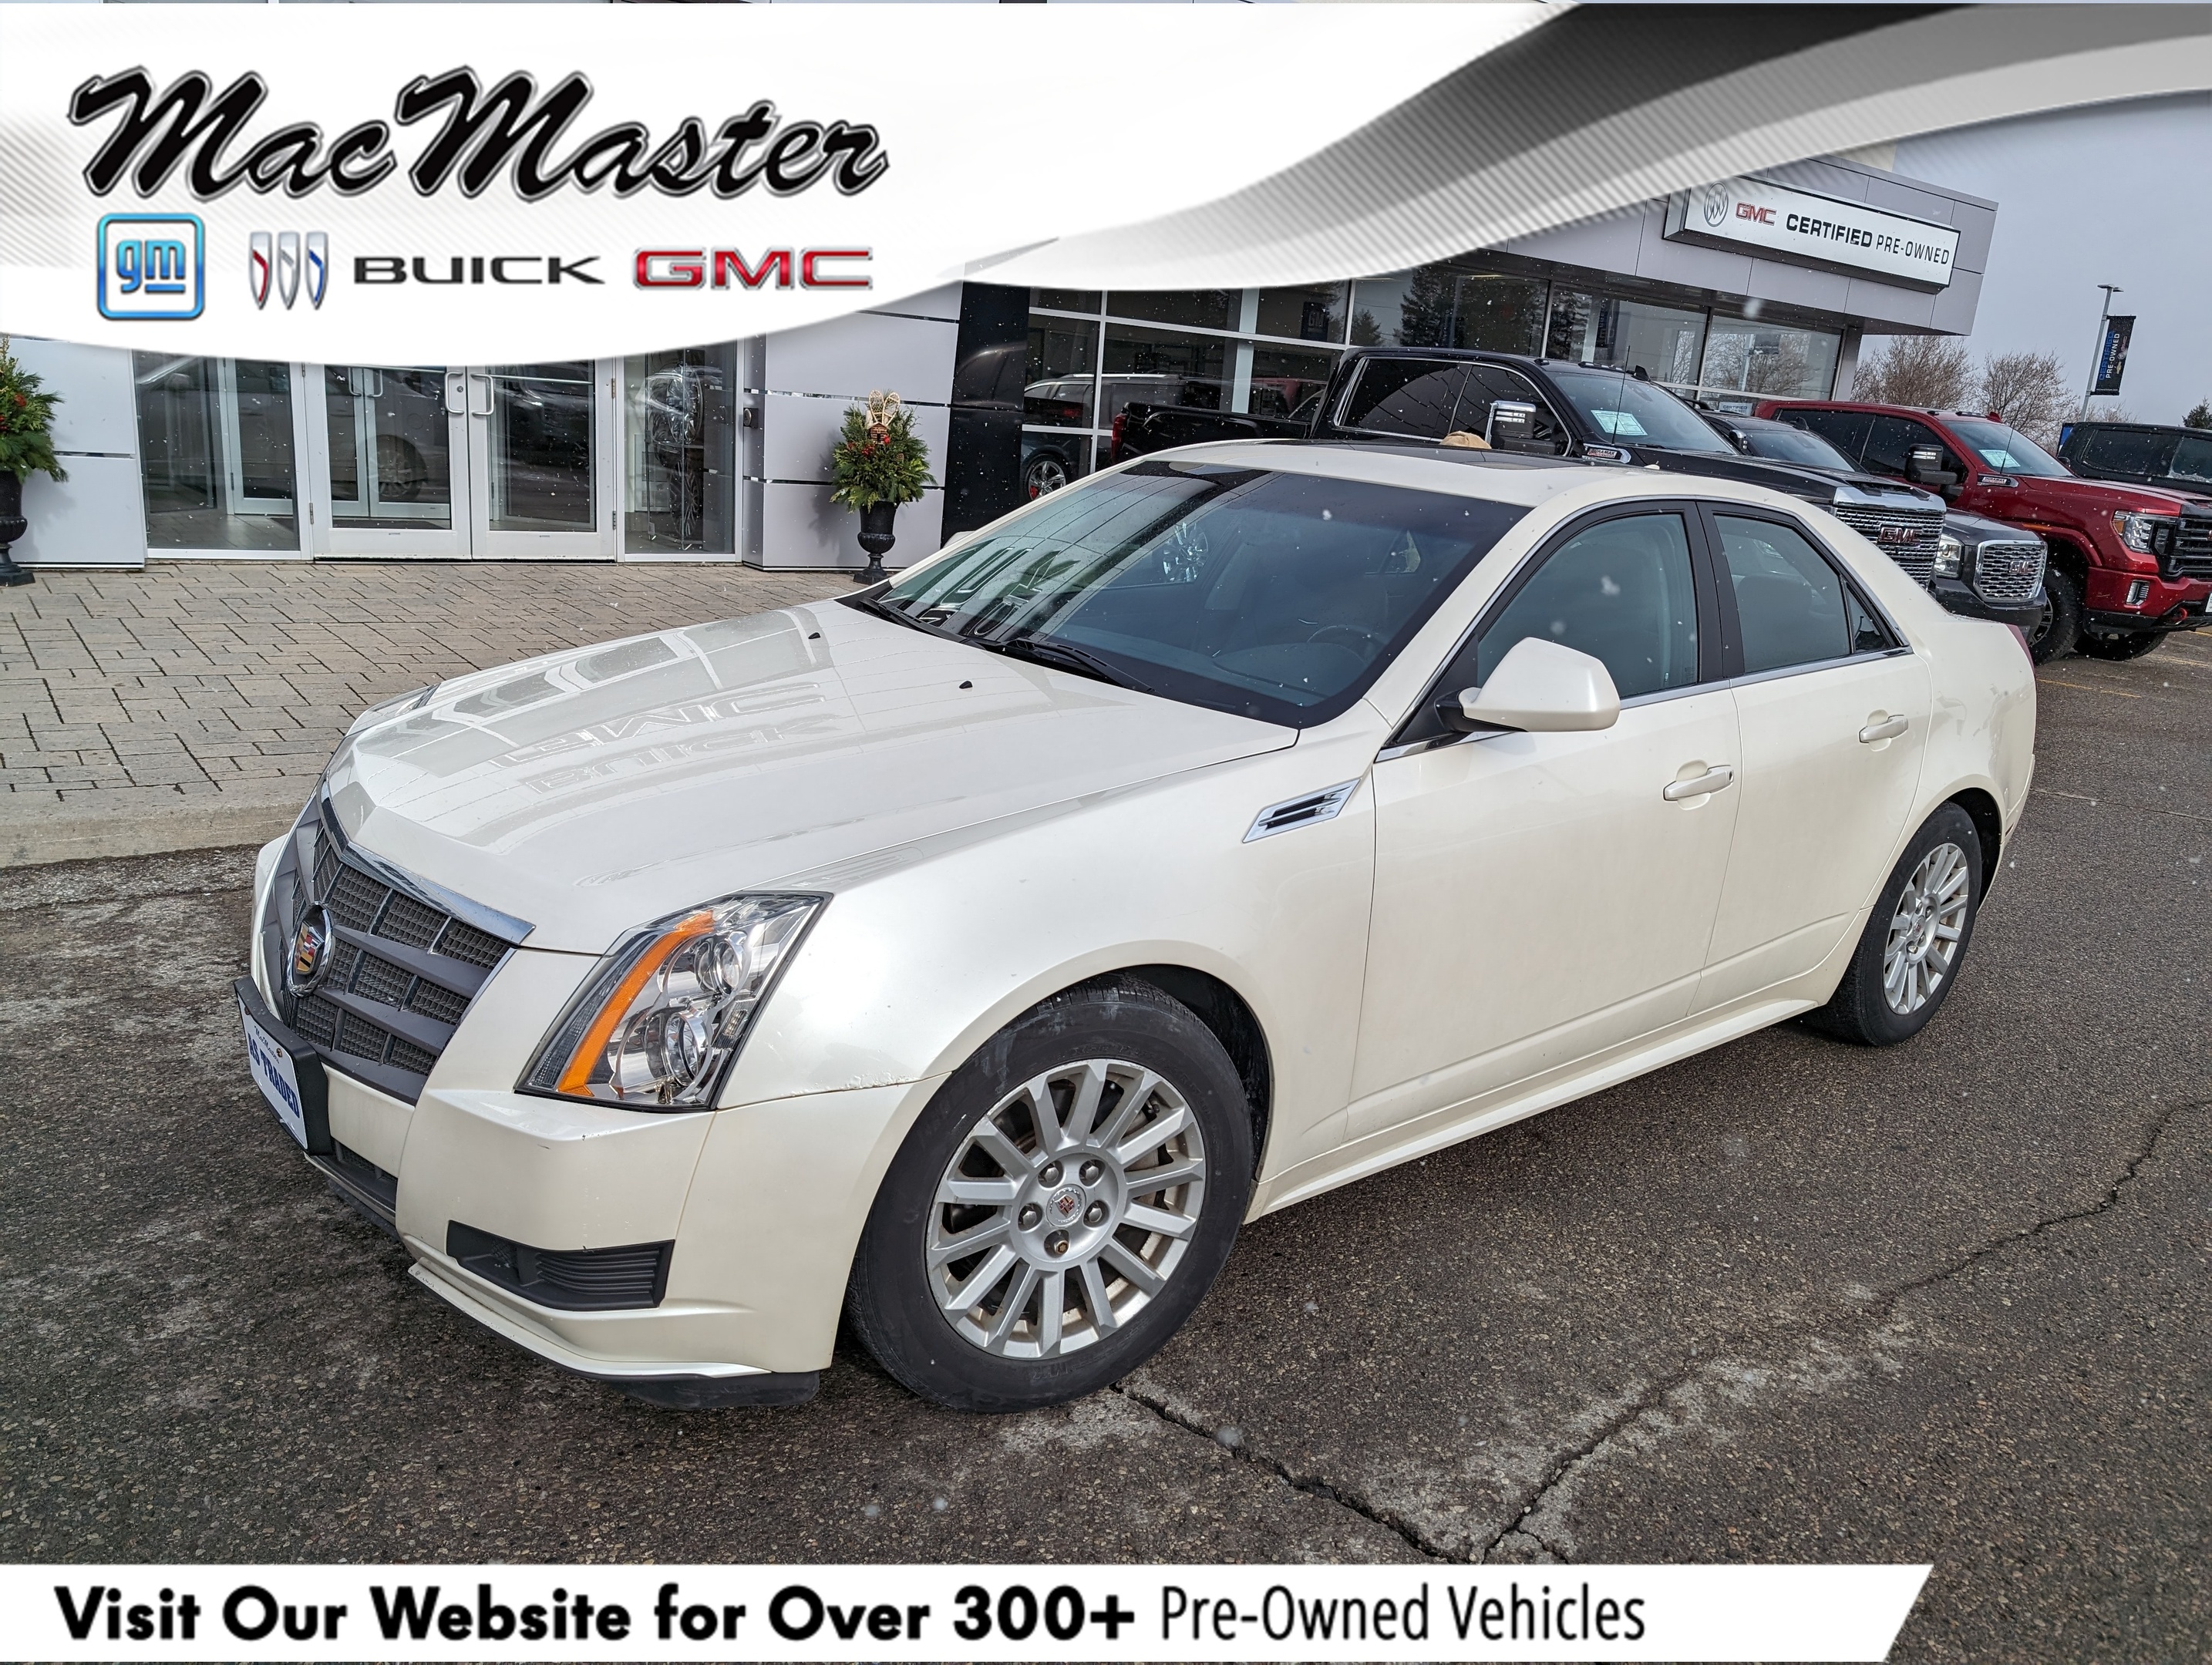 2010 Cadillac CTS LUXURY, 3.0L, SUNROOF, HEATED LEATHER, CERTIFIED!